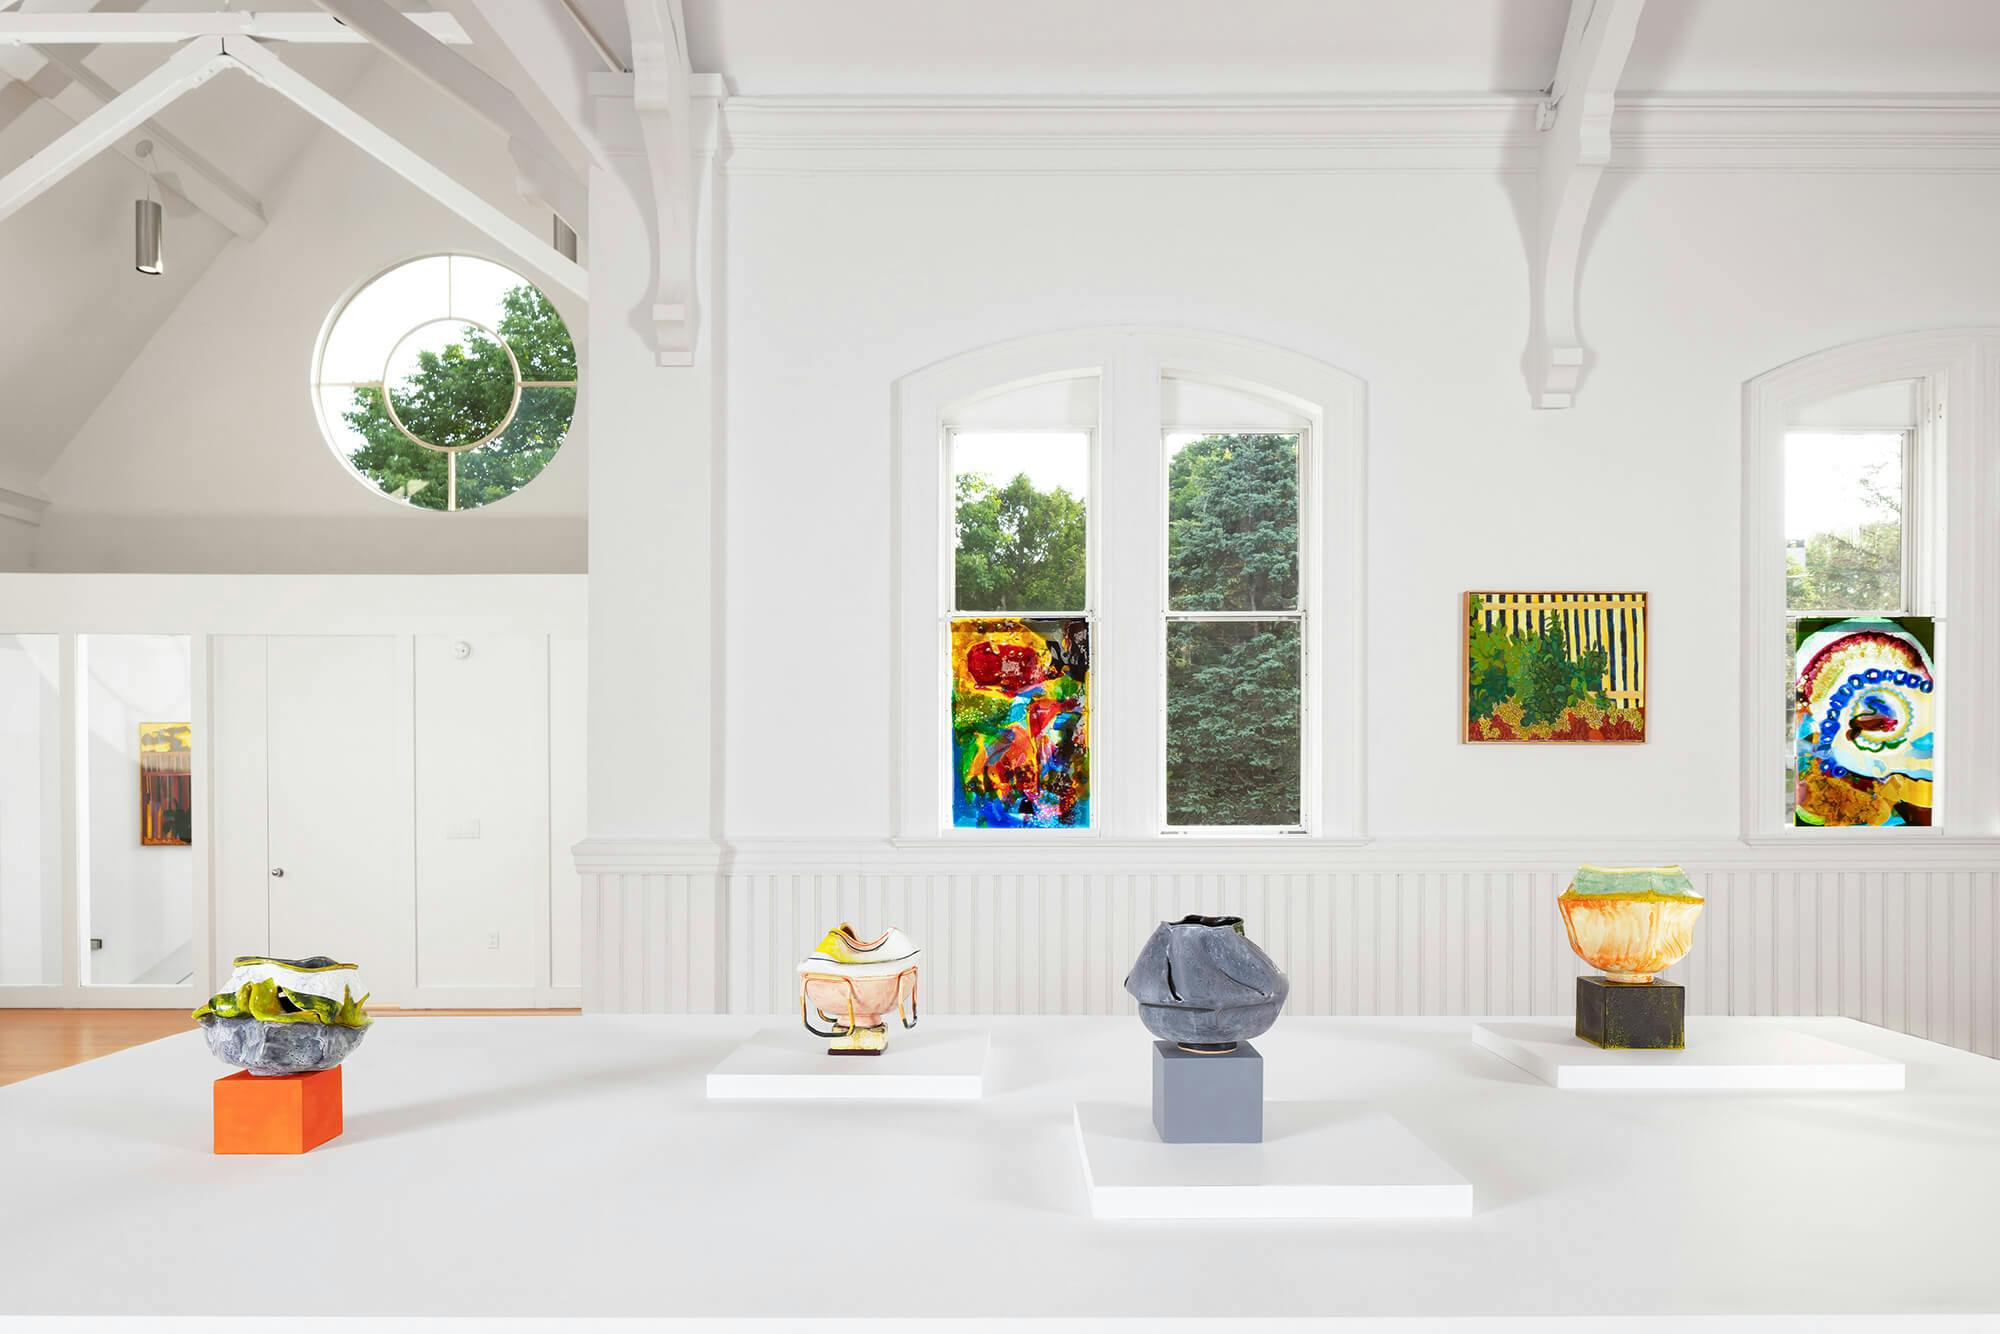 Artworks on display in a white walled deconsecrated Catholic church.